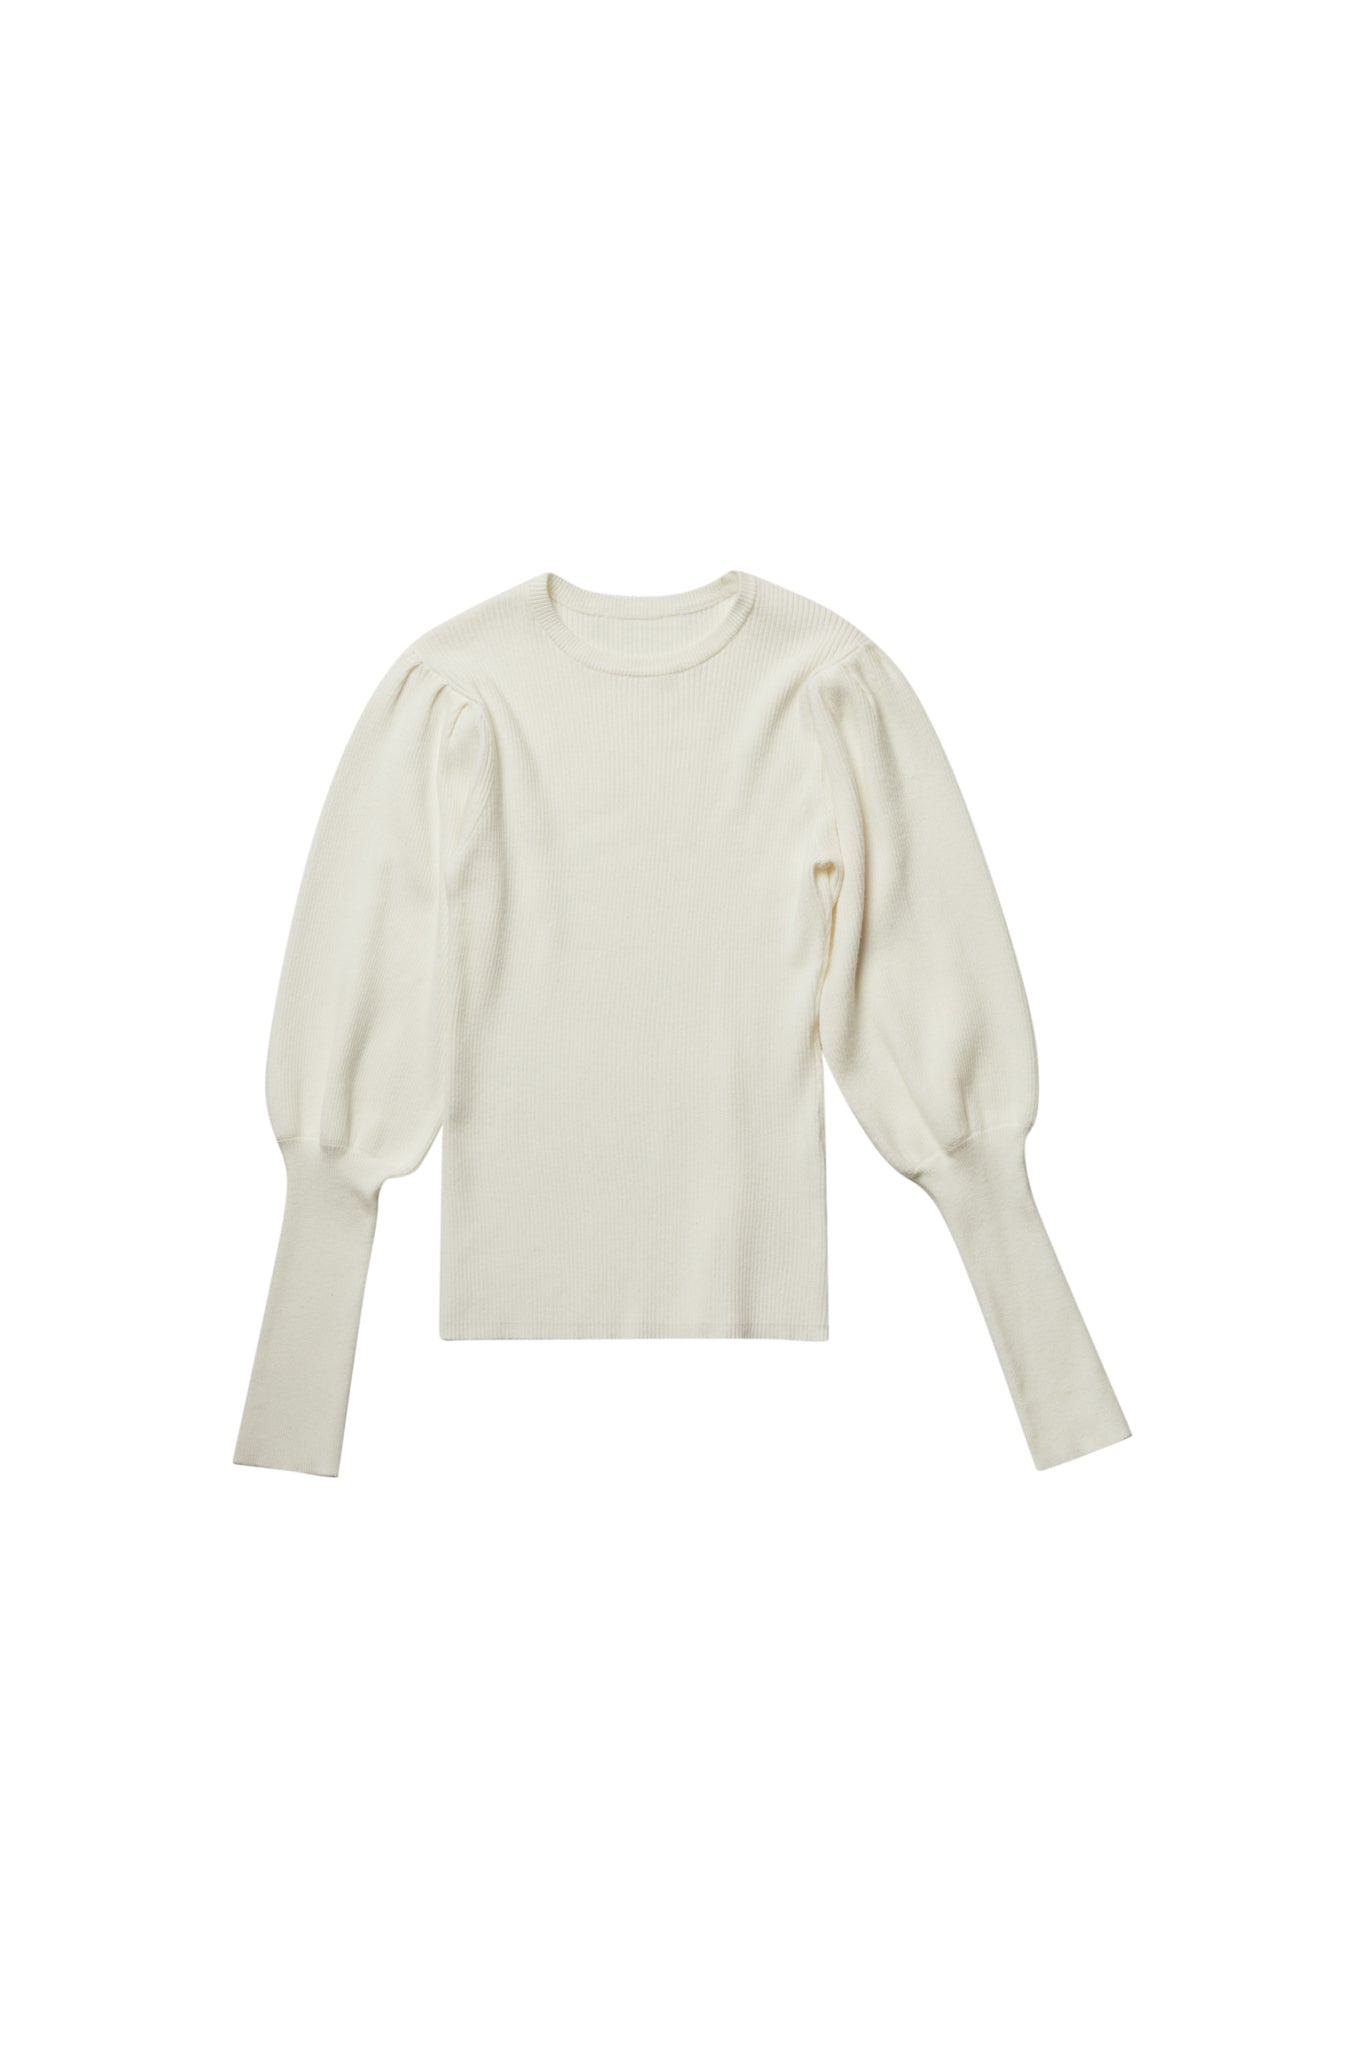 Puff Sleeves Sweater in Ivory #8140zk FINAL SALE